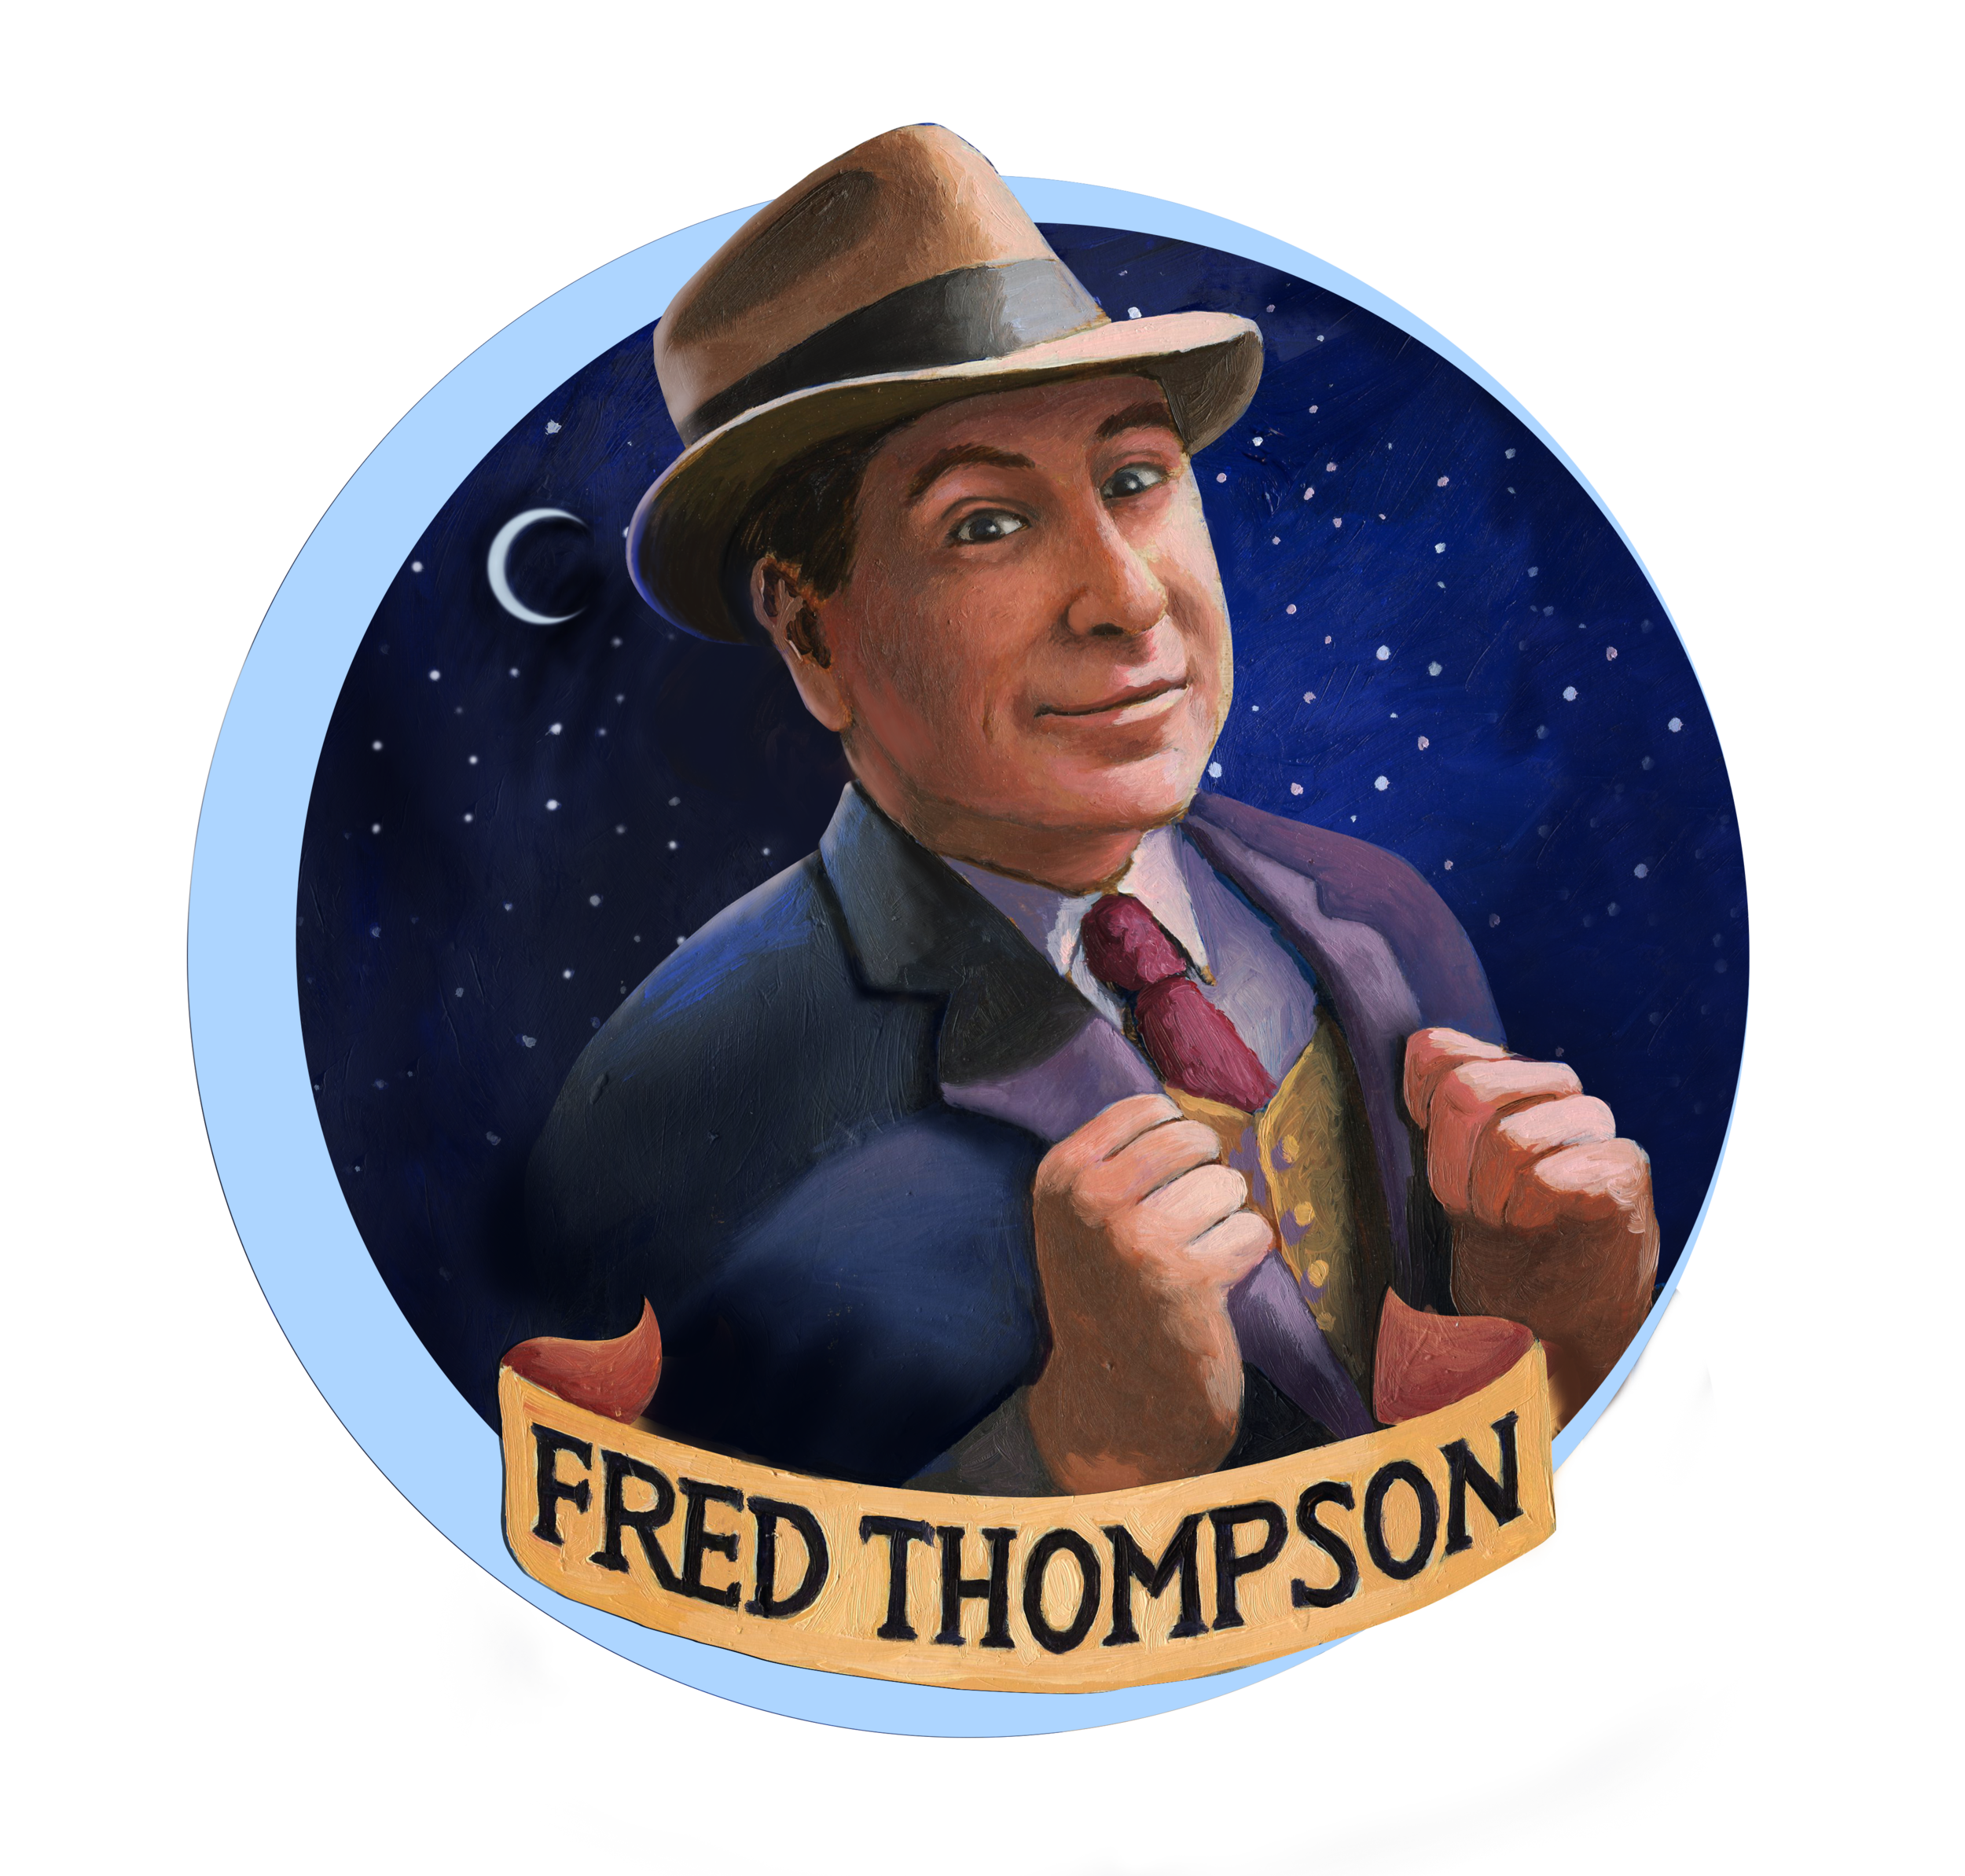 Fred Thompson vignette painting.png